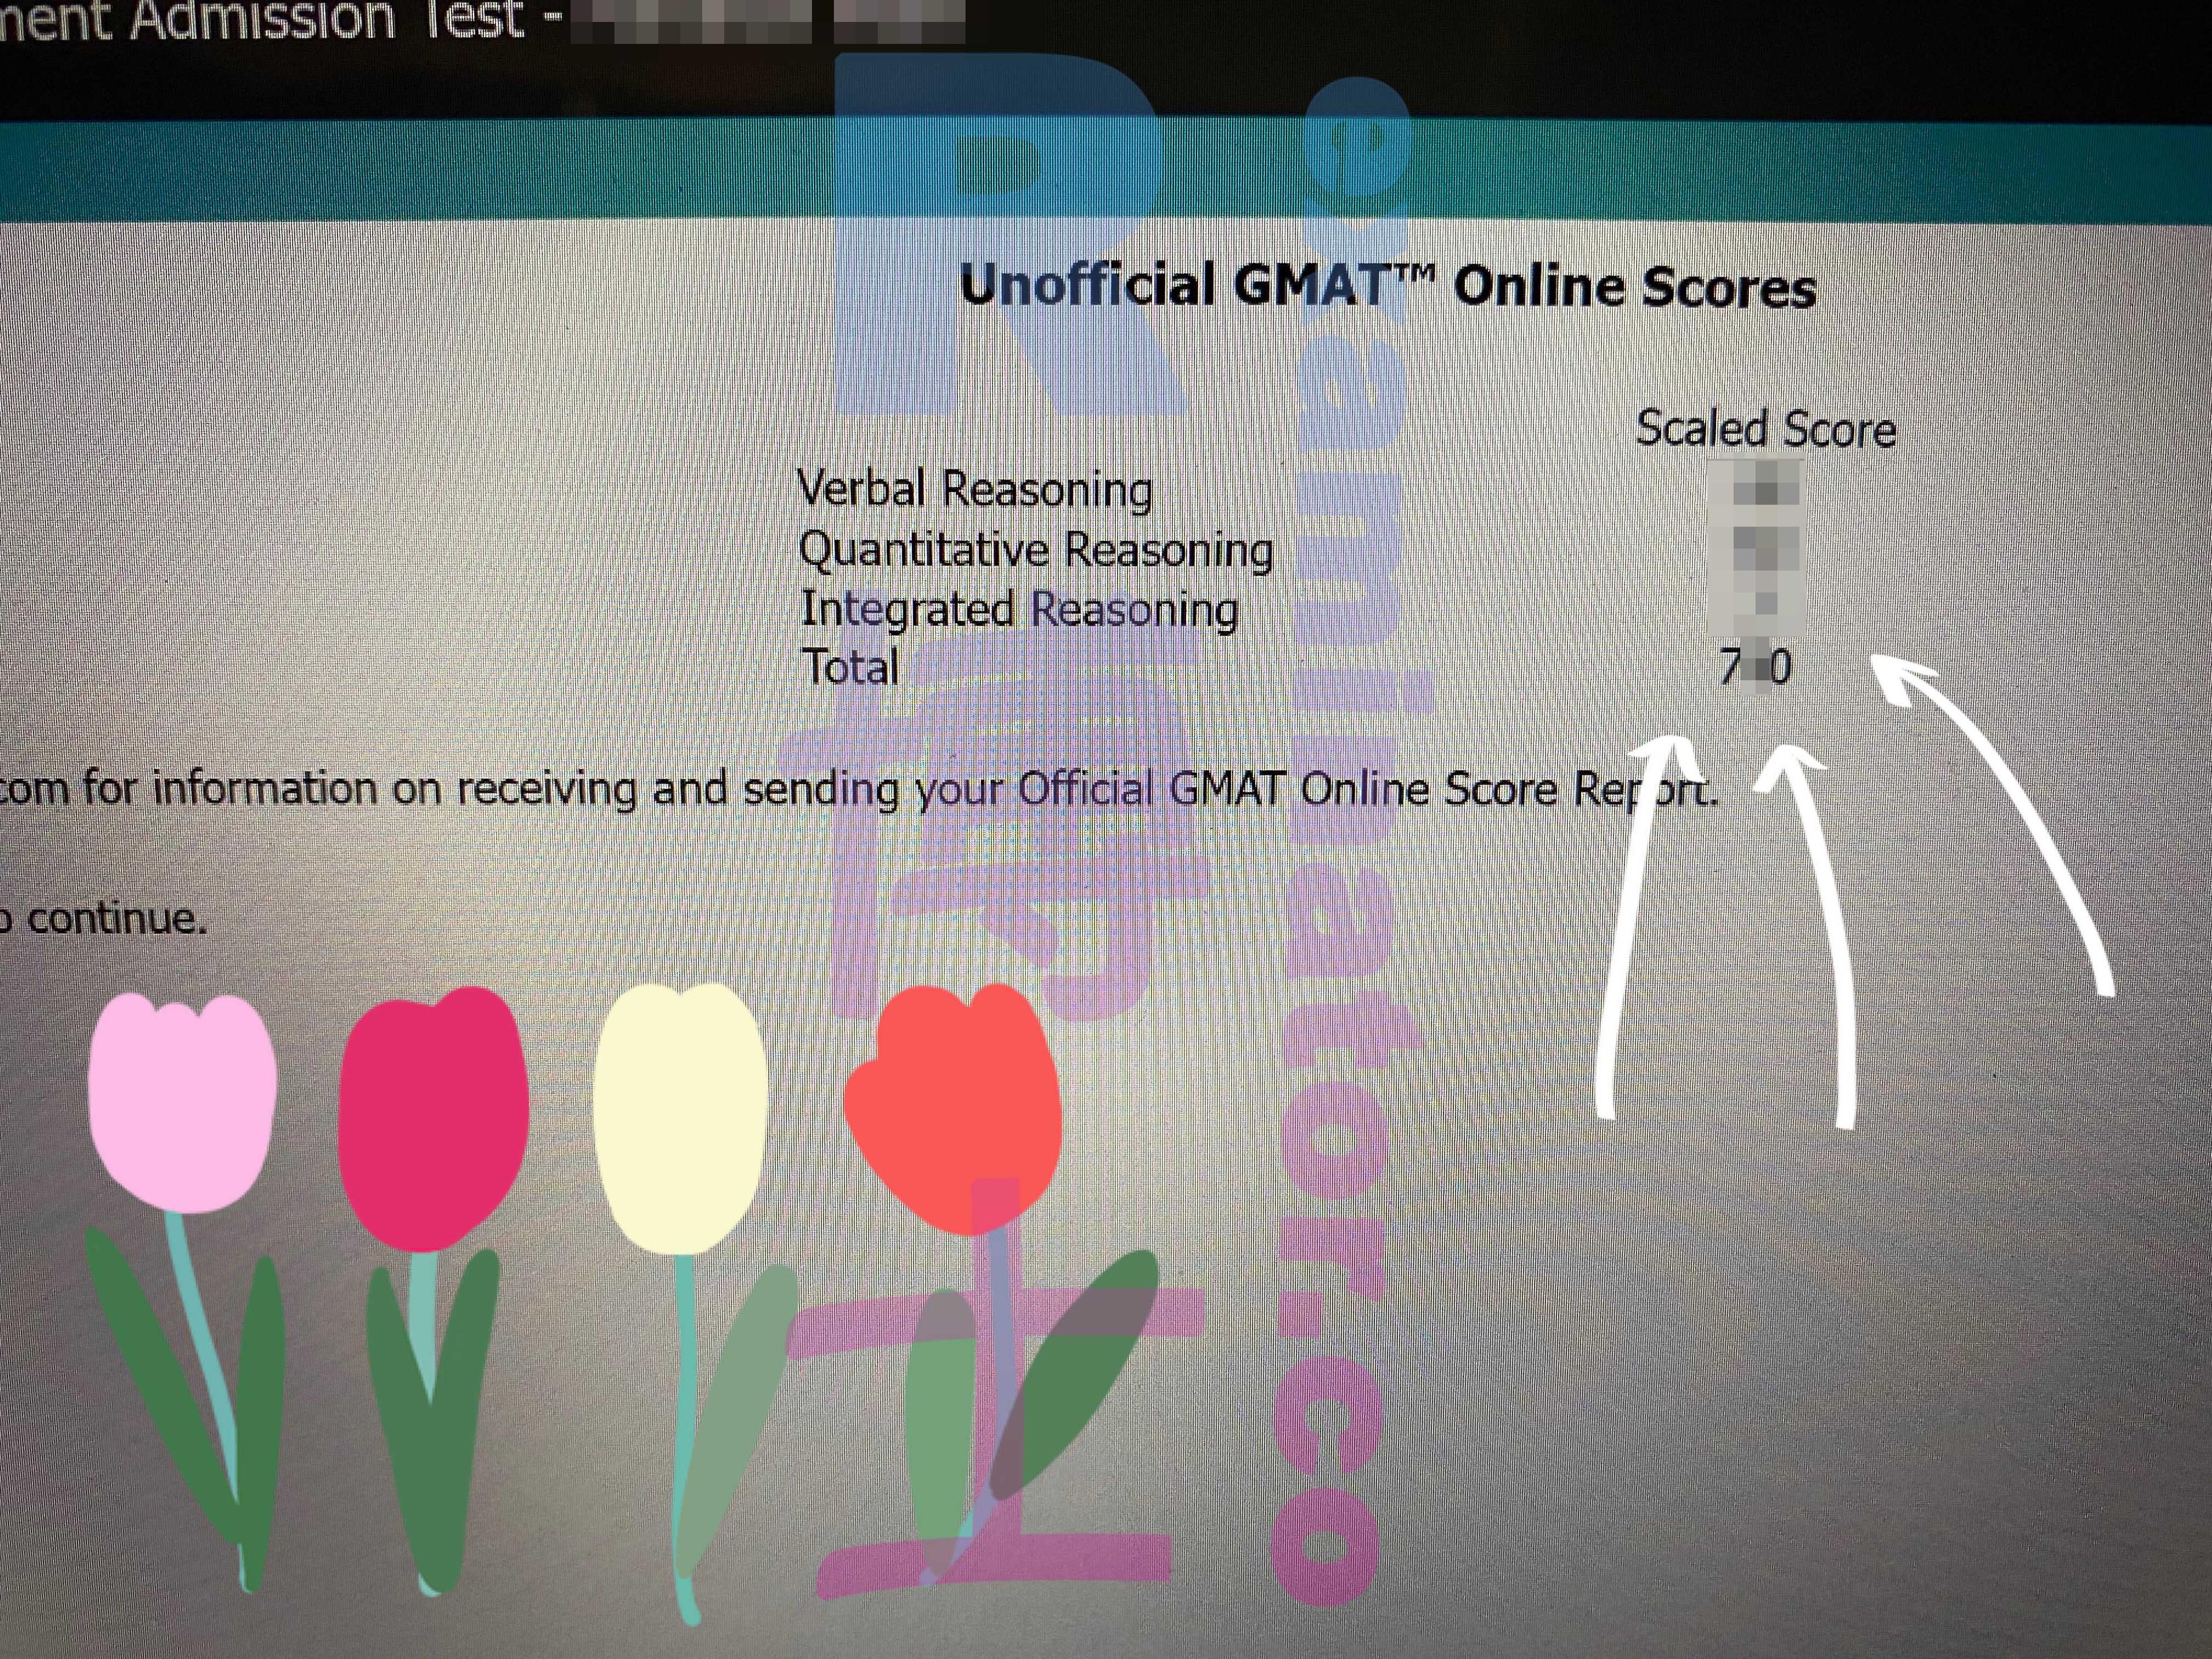 score image for GMAT Cheating success story #402